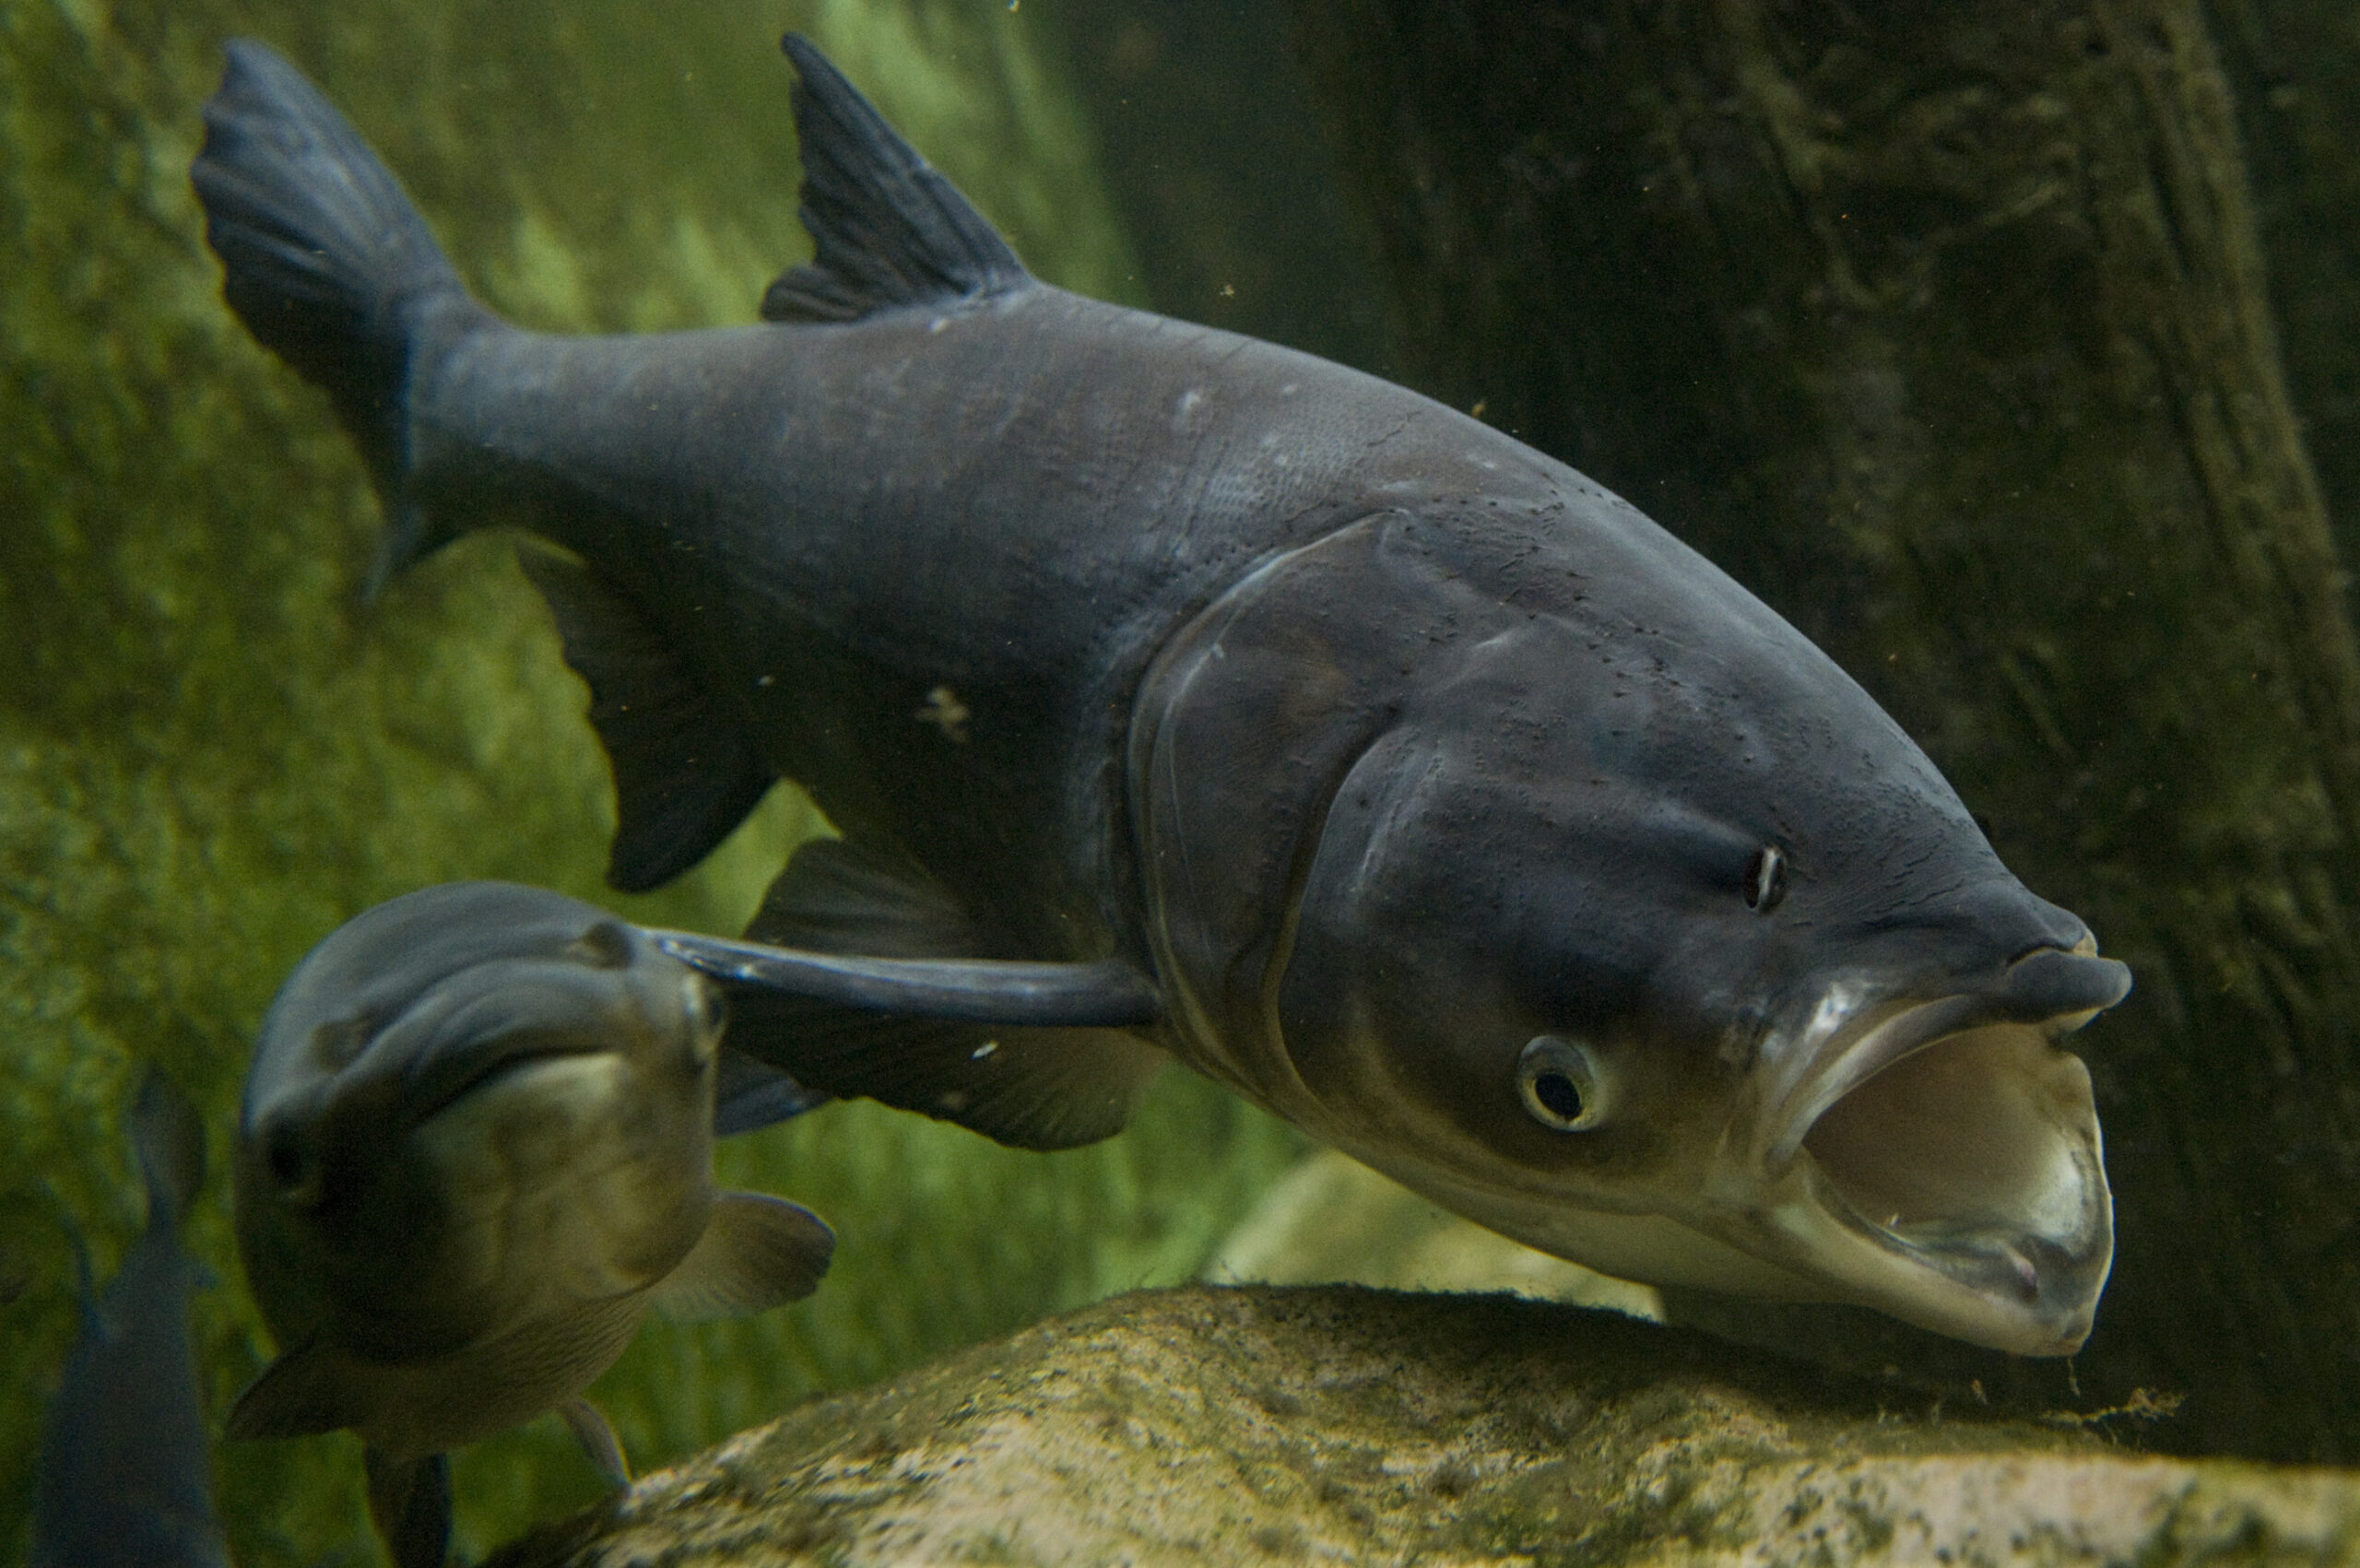 A black carp fish swims near a mossy rock with its mouth open.